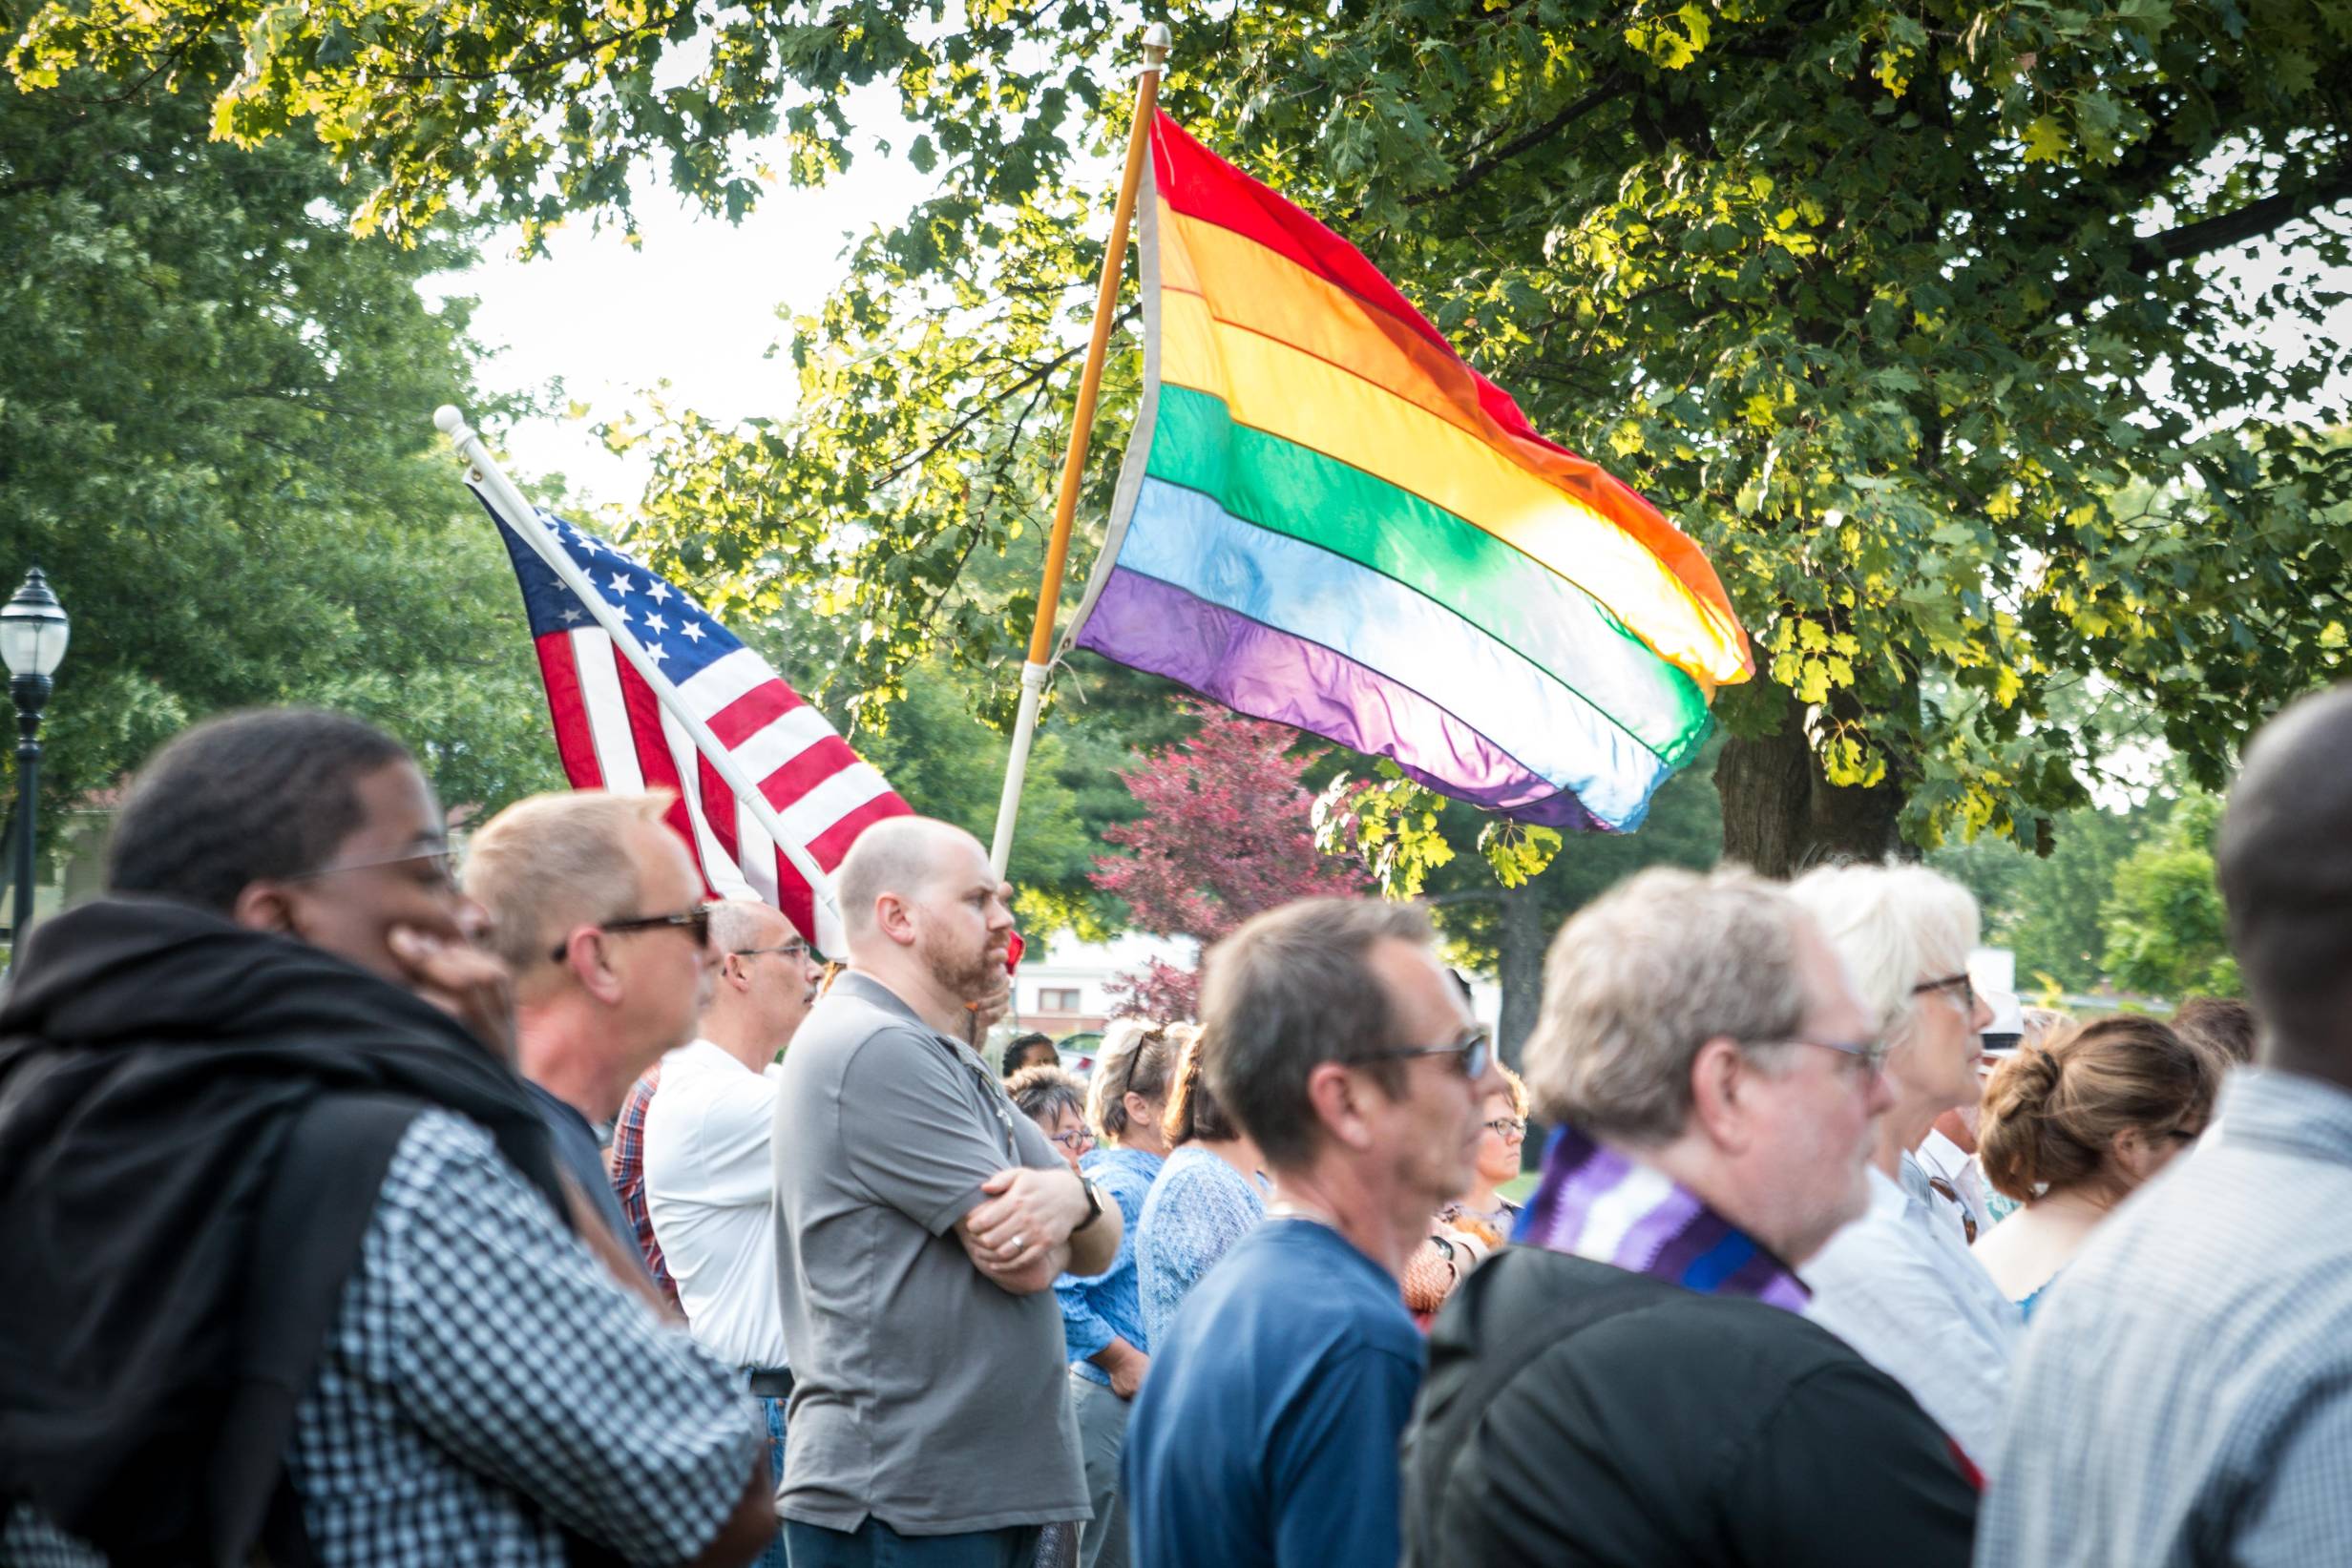 A look into the Vigil to remember Orlando